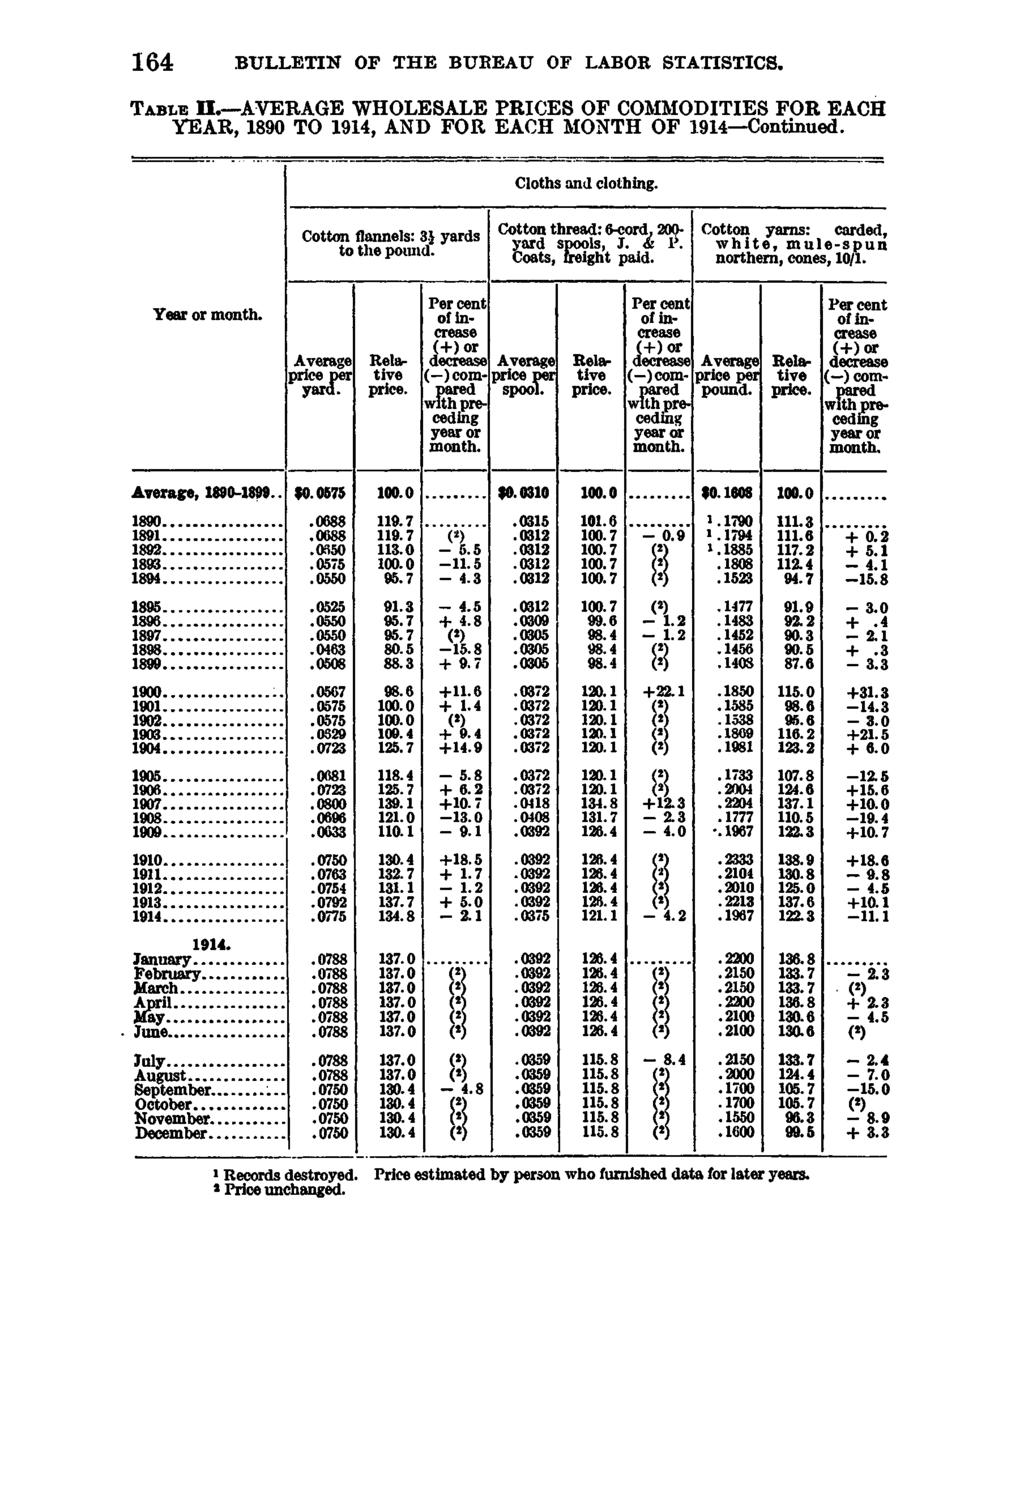 164 BULLETIN OP THE BUREAU OF LABOR STATISTICS. T a b l e II. AVERAGE WHOLESALE PRICES OF COMMODITIES FOR EACH YEAR, 1890 TO 1914, AND FOR EACH MONTH OF 1914 Continued. Cloths and clothing.